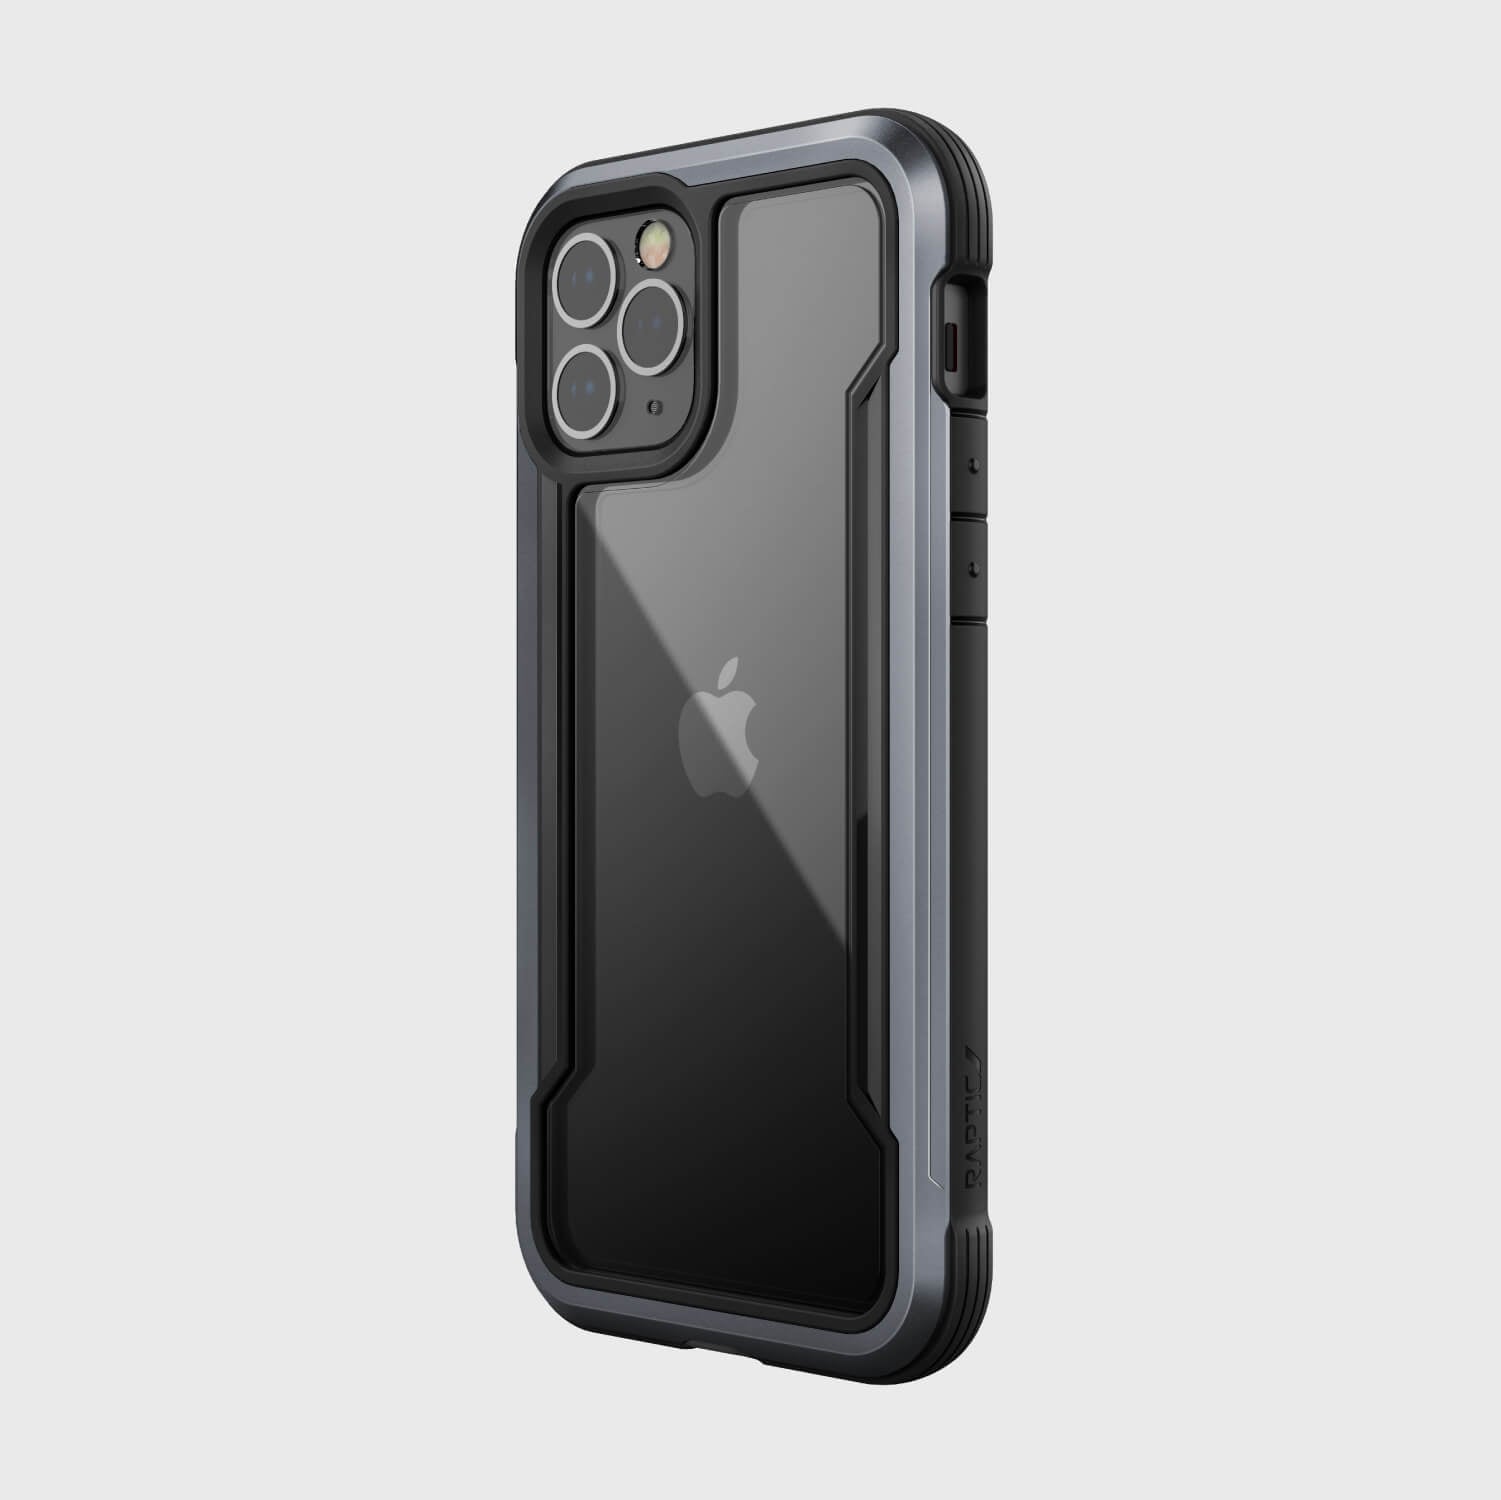 The back of the iPhone 12 Pro Max case is shown, featuring the Raptic SHIELD case for foot drop protection.